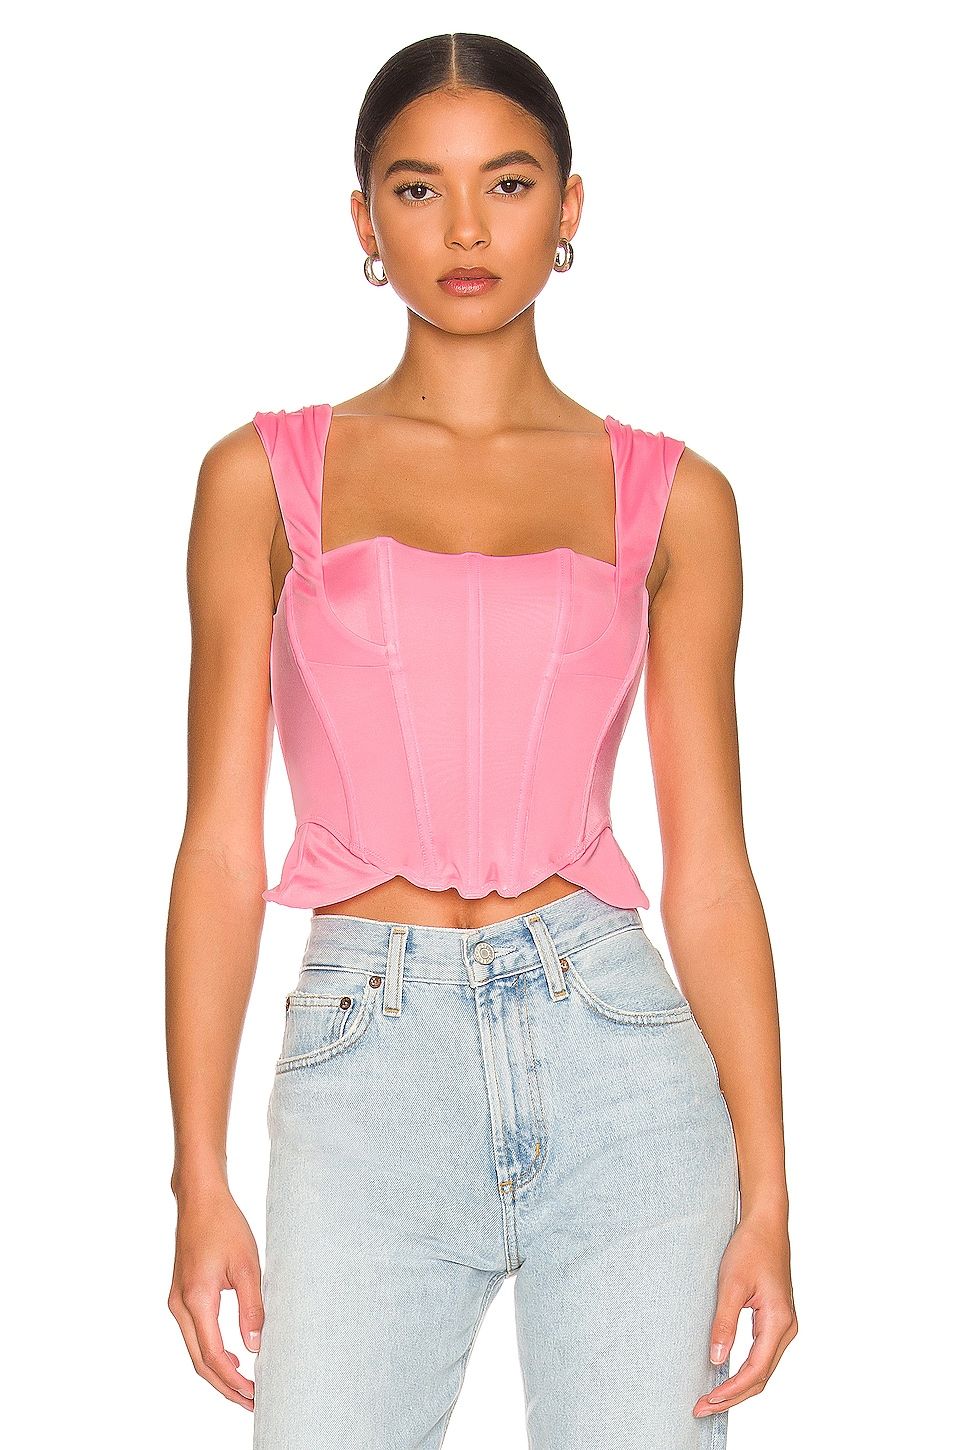 Knock Out Corset Top